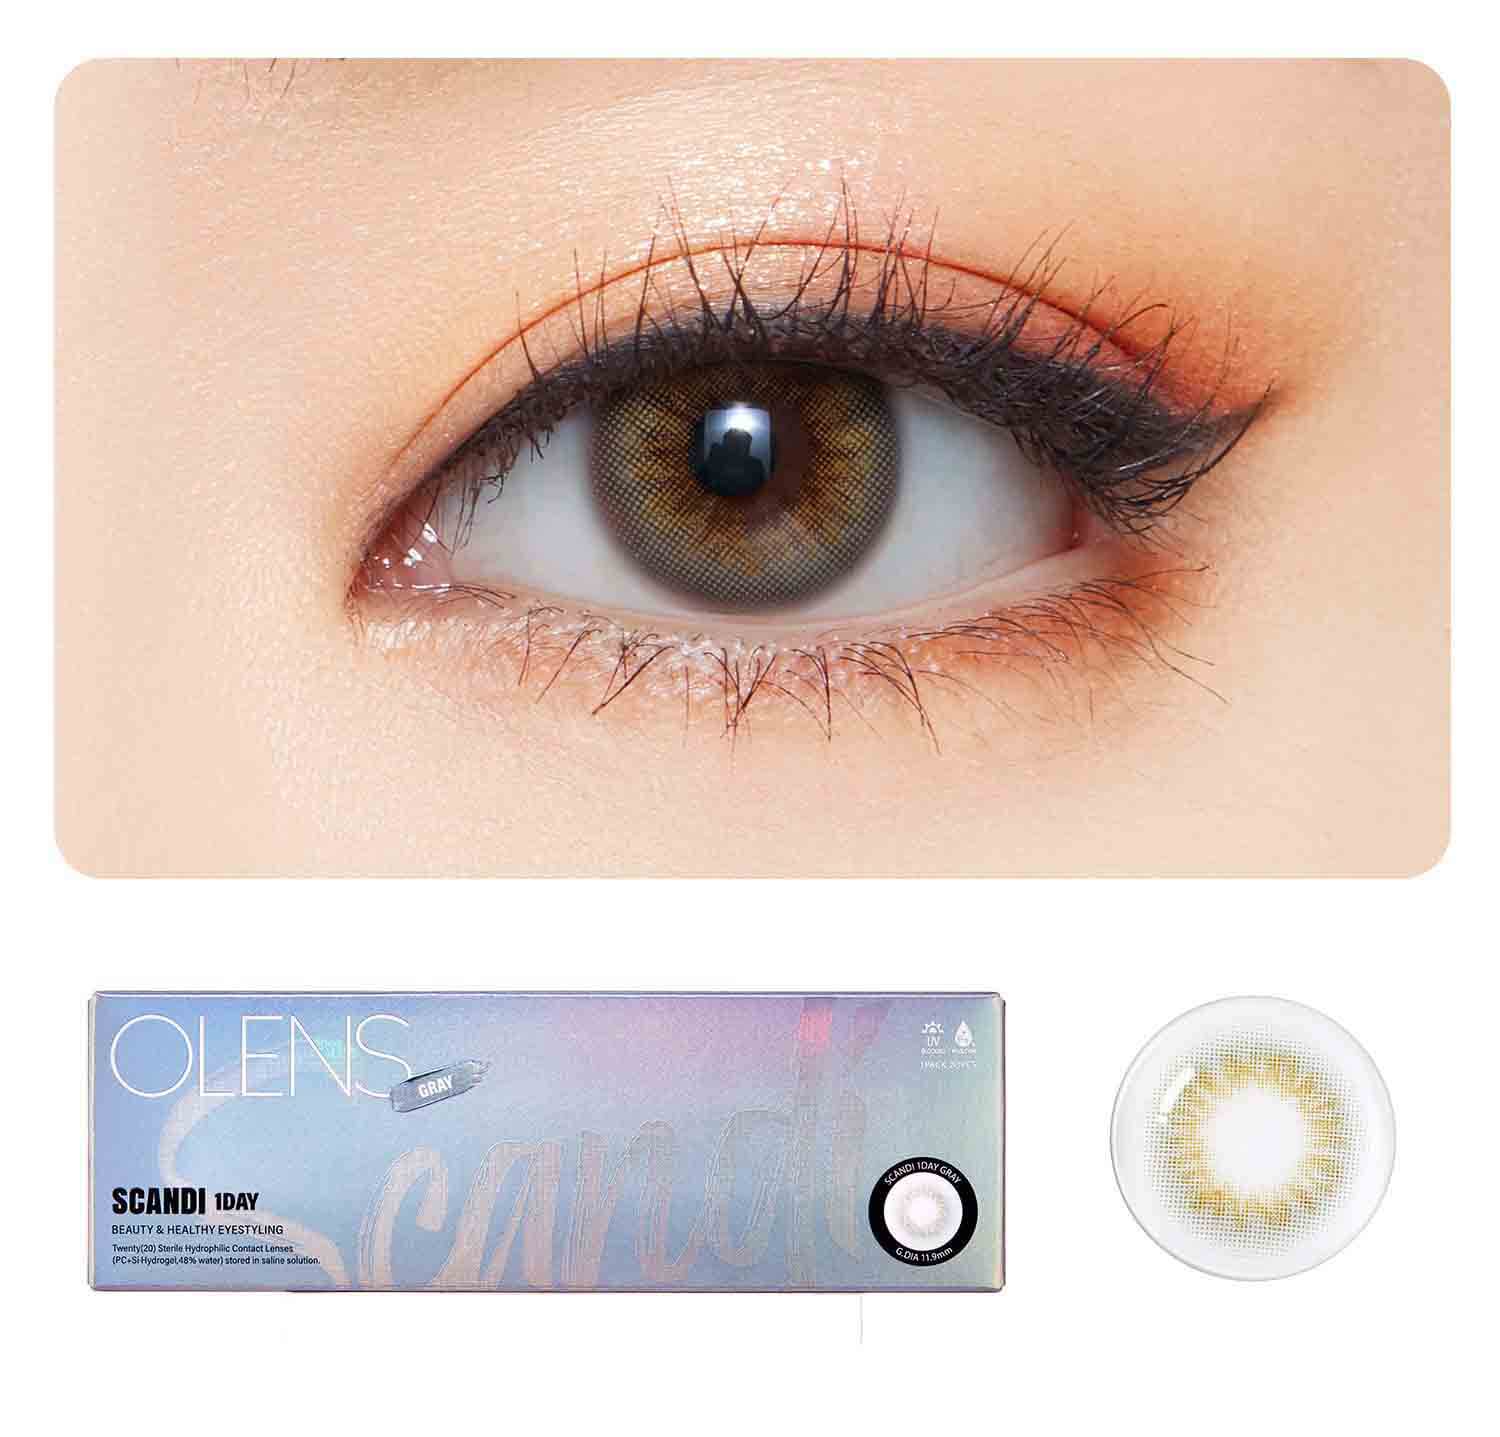 OLENS Premium Color Contact Lens Scandi Gray 1 Day Shade in Daily Combo Kit | Free Shipping & Cash on Delivery available | o-lens.co.in.